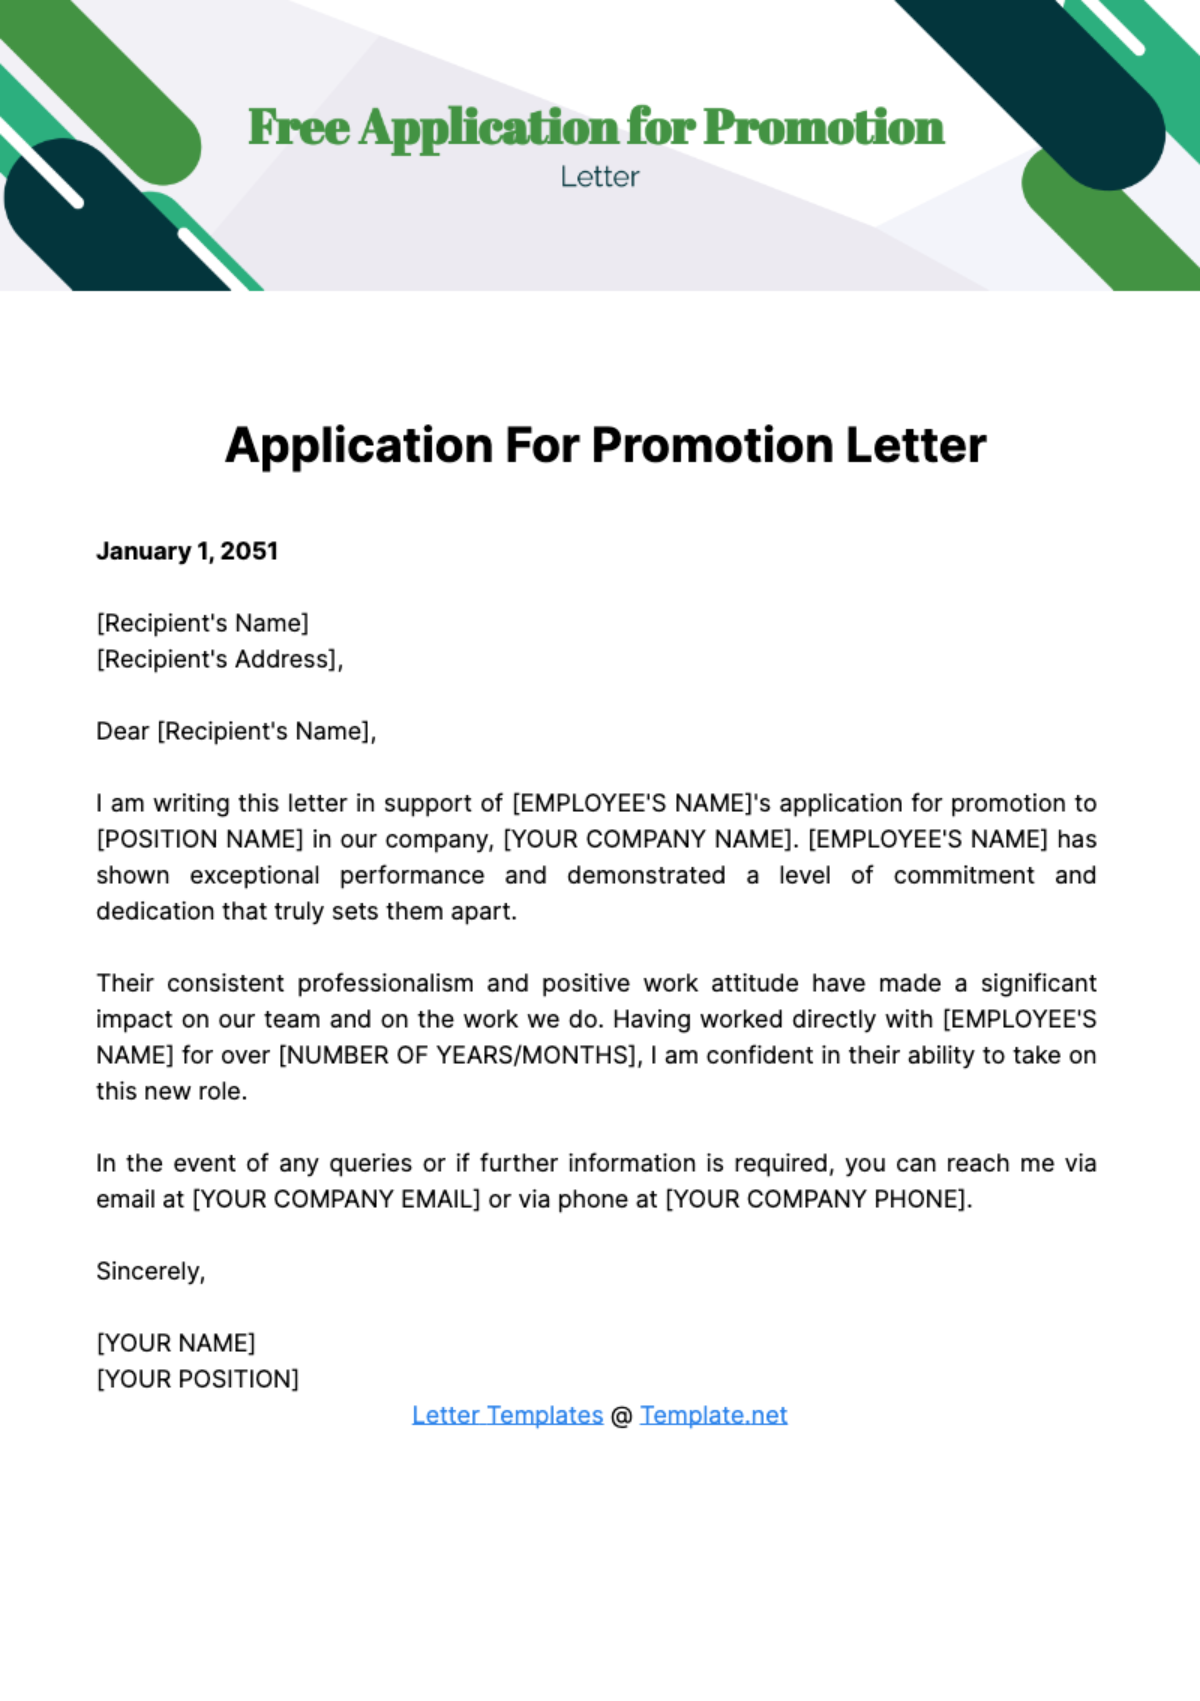 Free Application for Promotion Letter Template